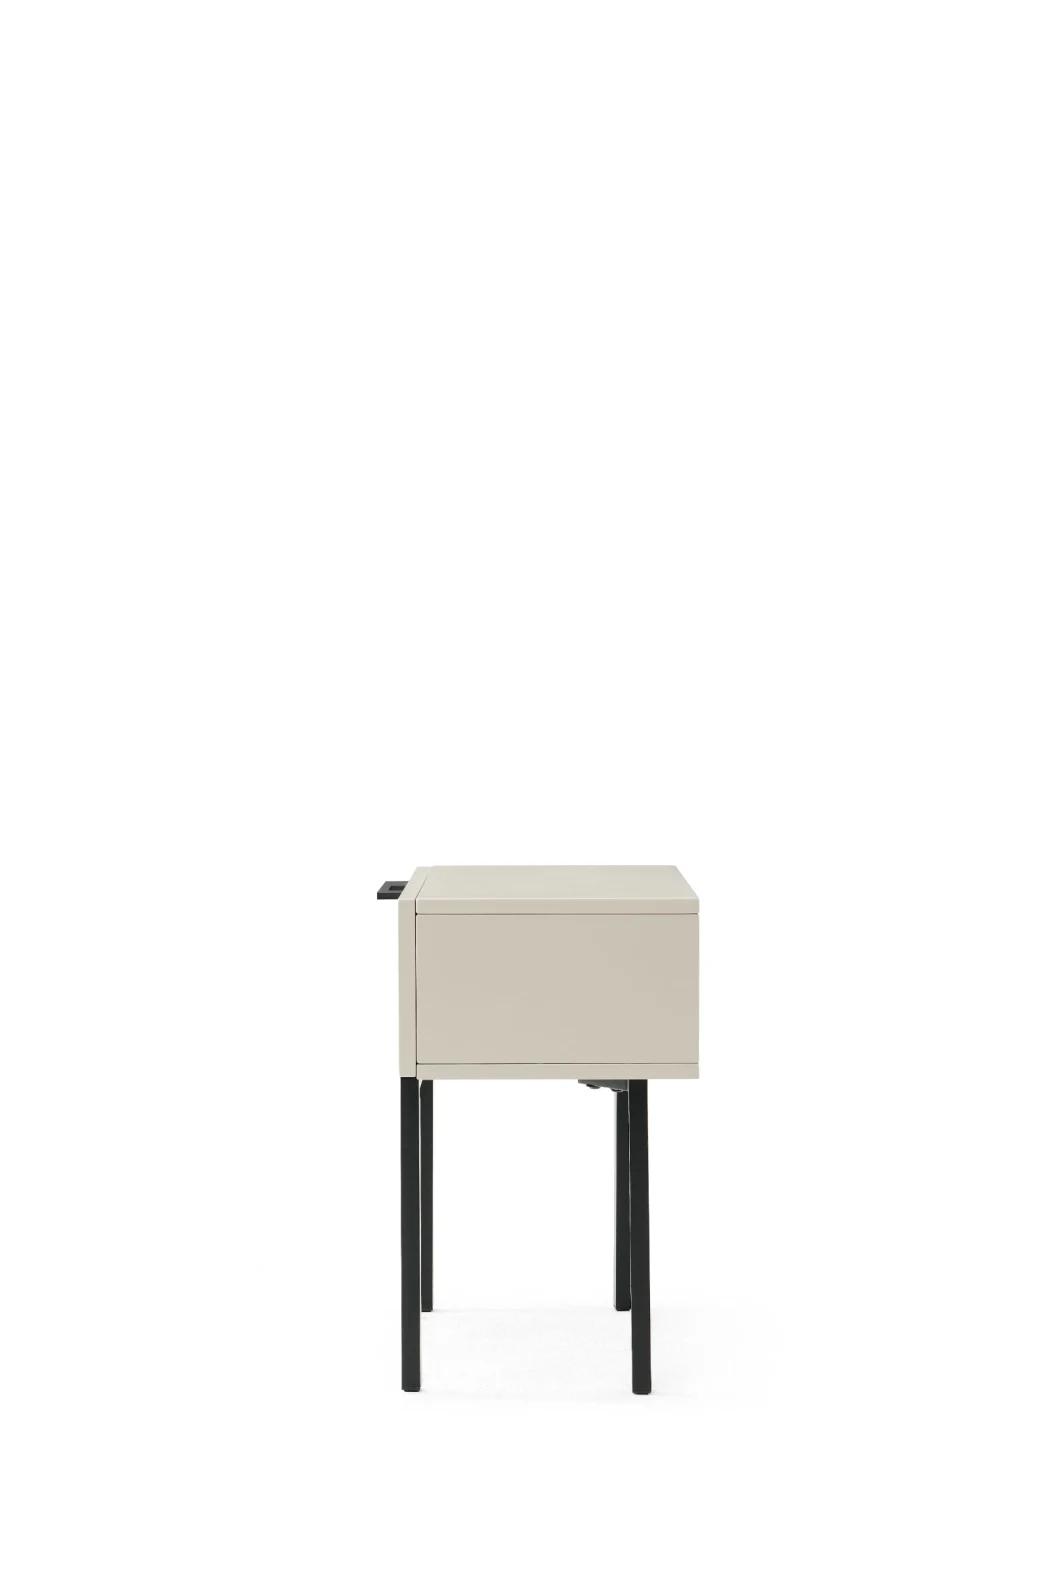 S-Ctg030 Wooden Night Stand, Latest Design Modern Night Table